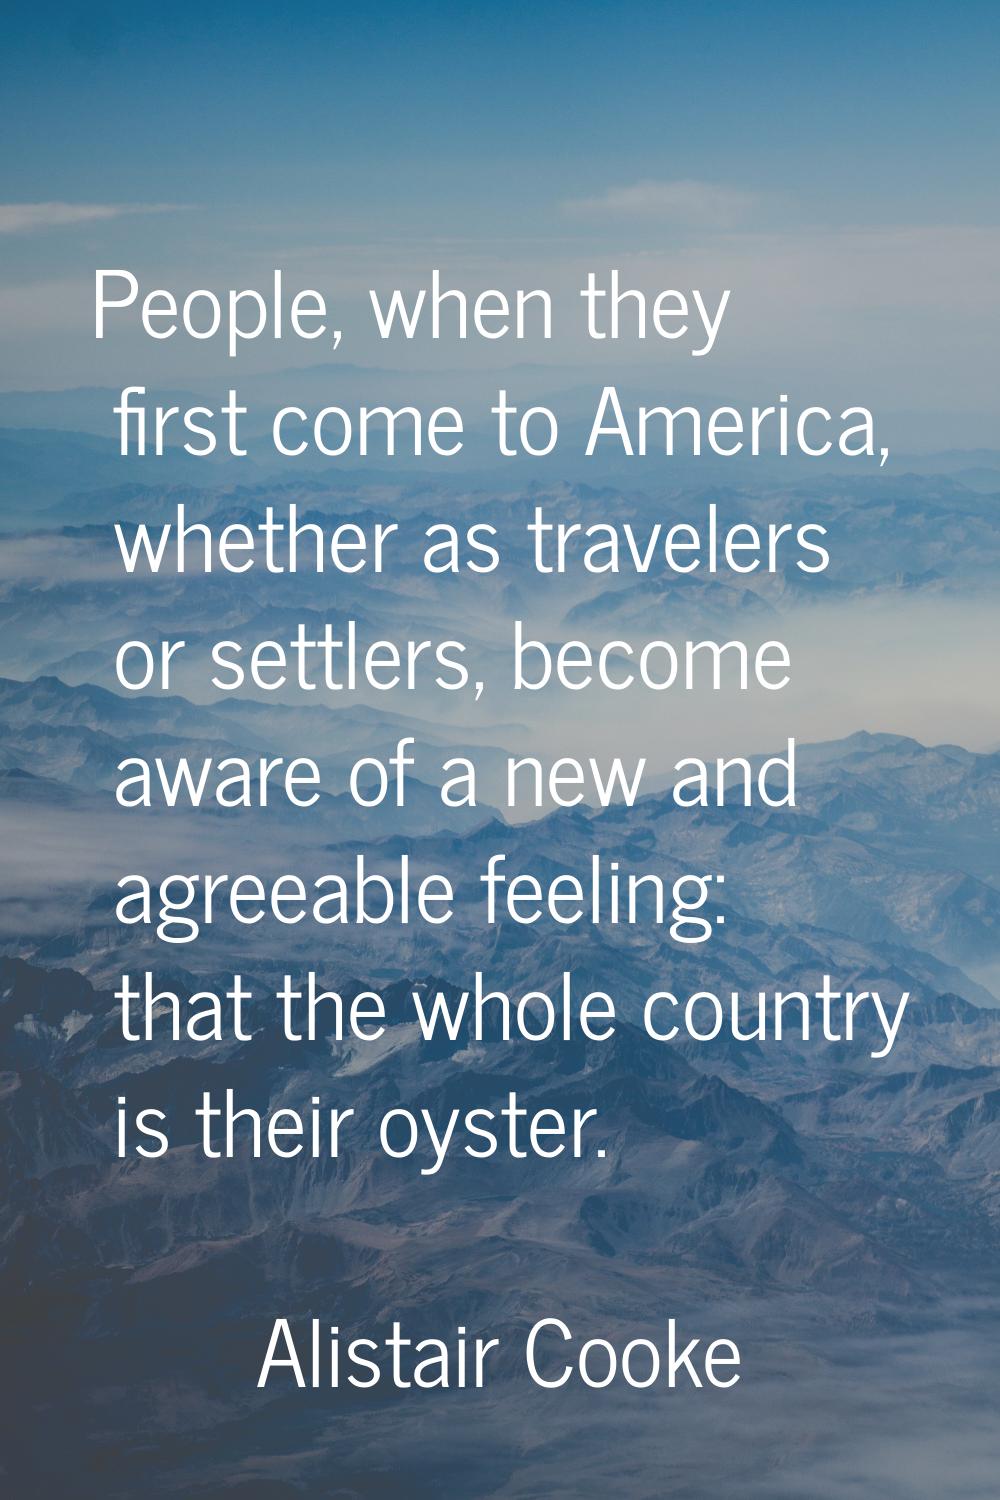 People, when they first come to America, whether as travelers or settlers, become aware of a new an